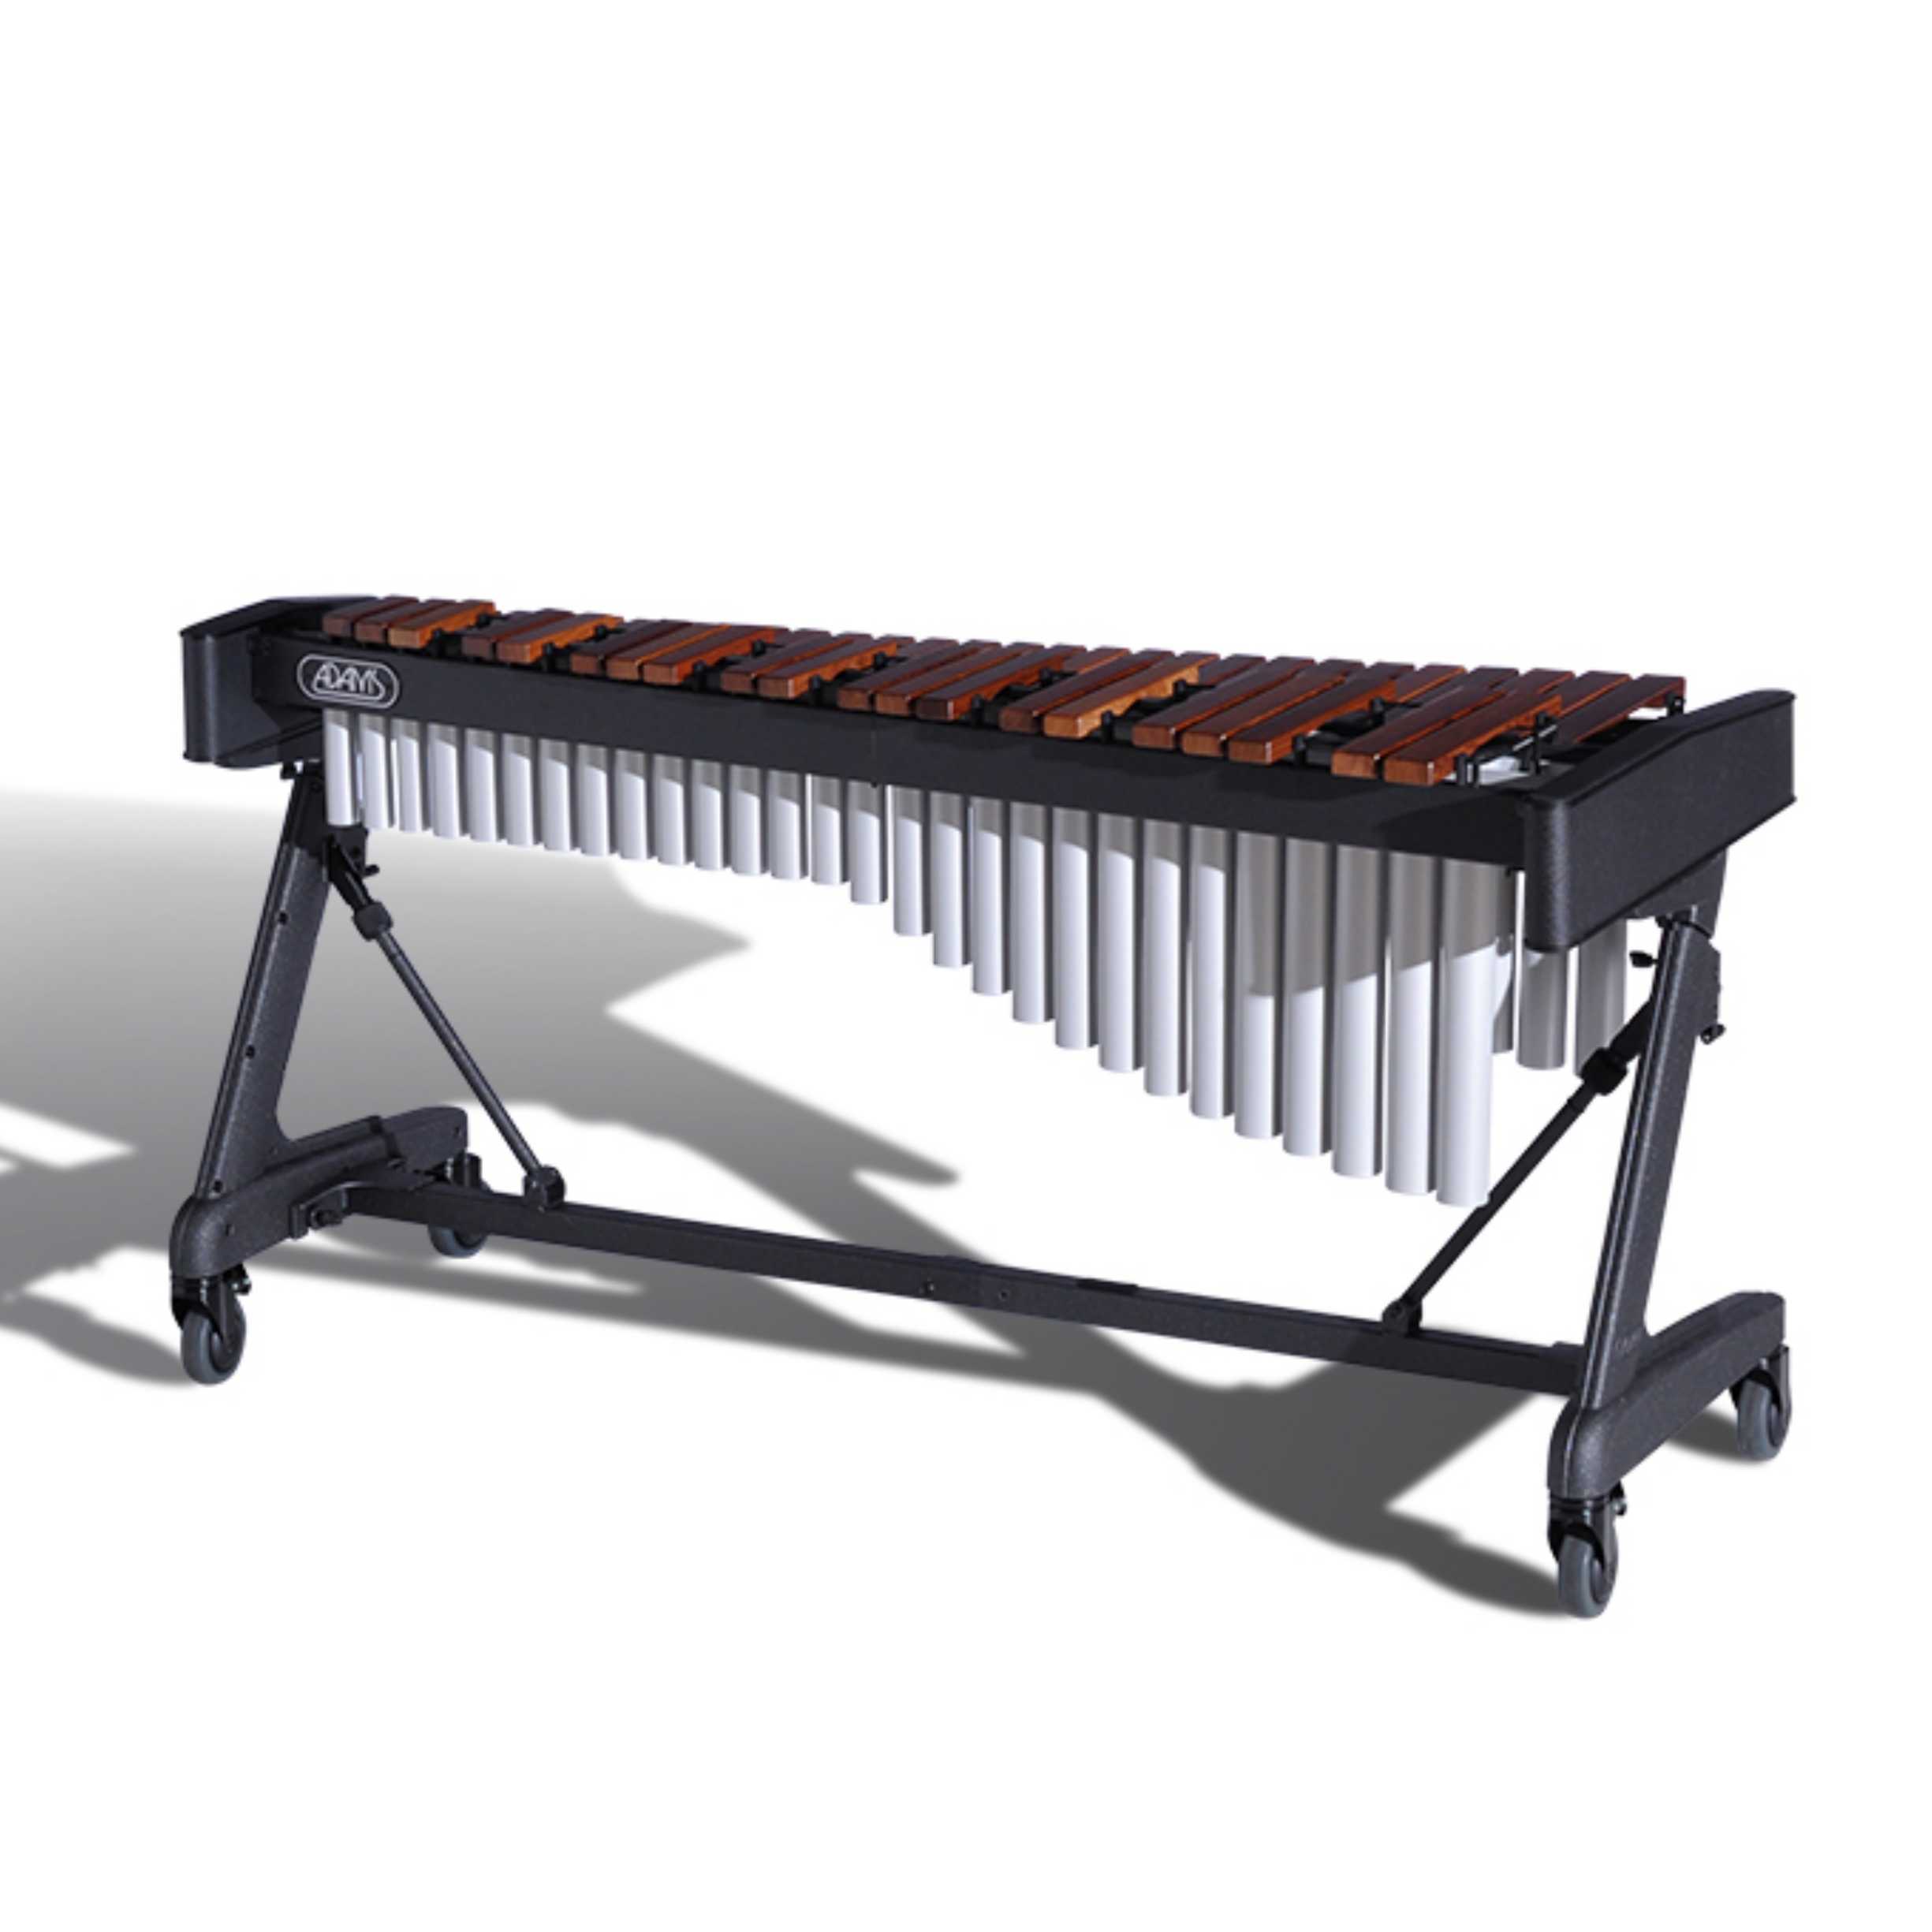 Adams Concert 4oct Rosewood Xylophone with Apex Frame